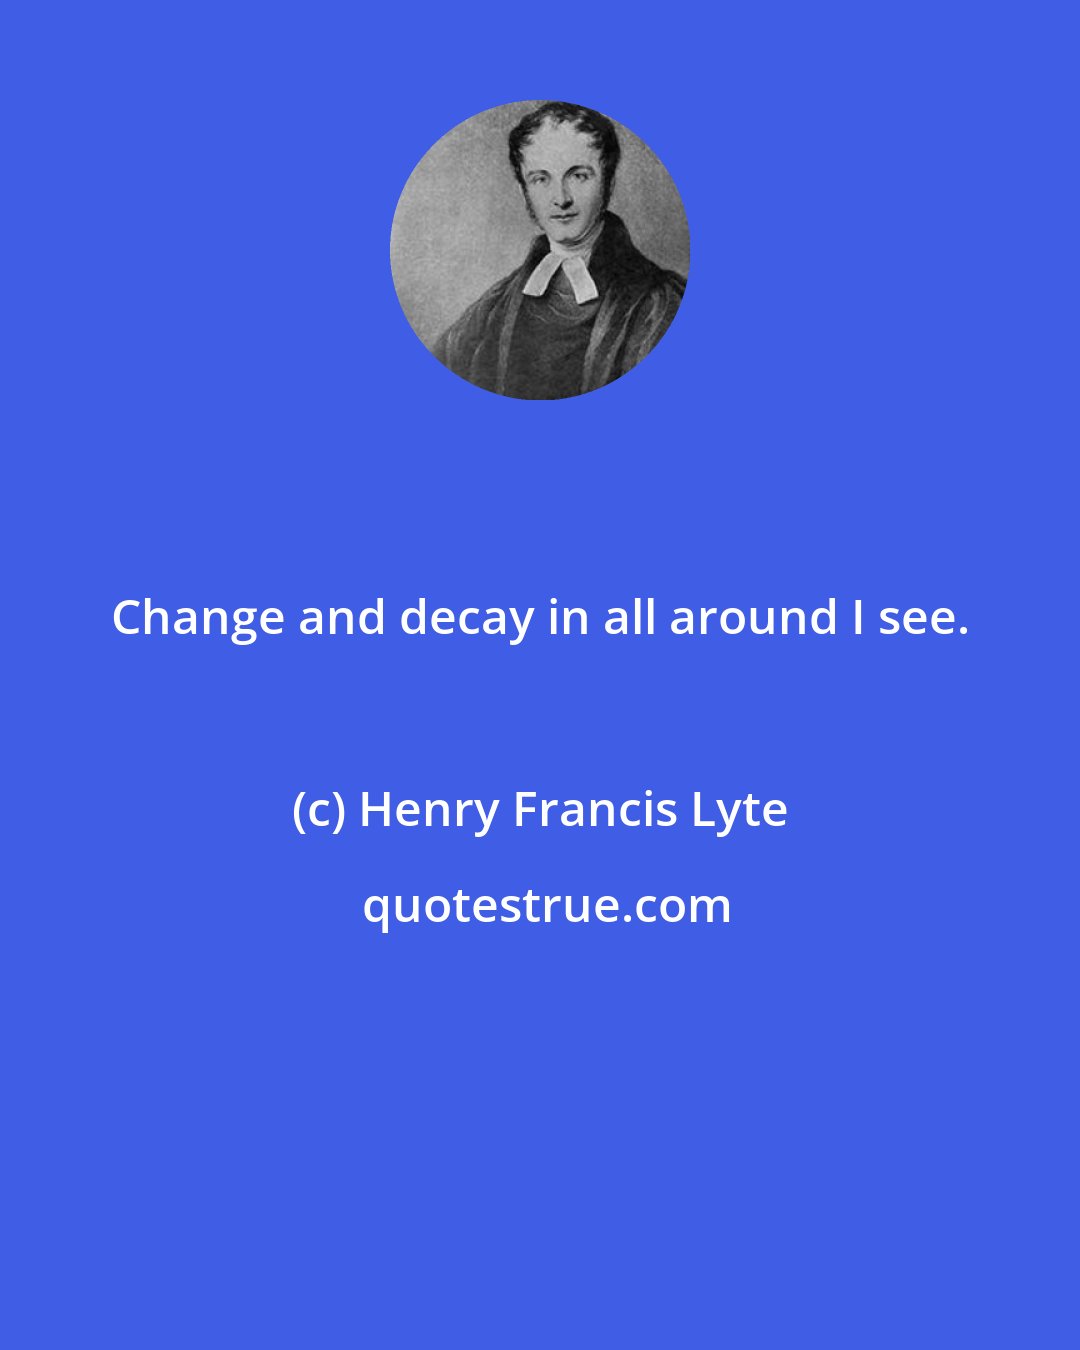 Henry Francis Lyte: Change and decay in all around I see.